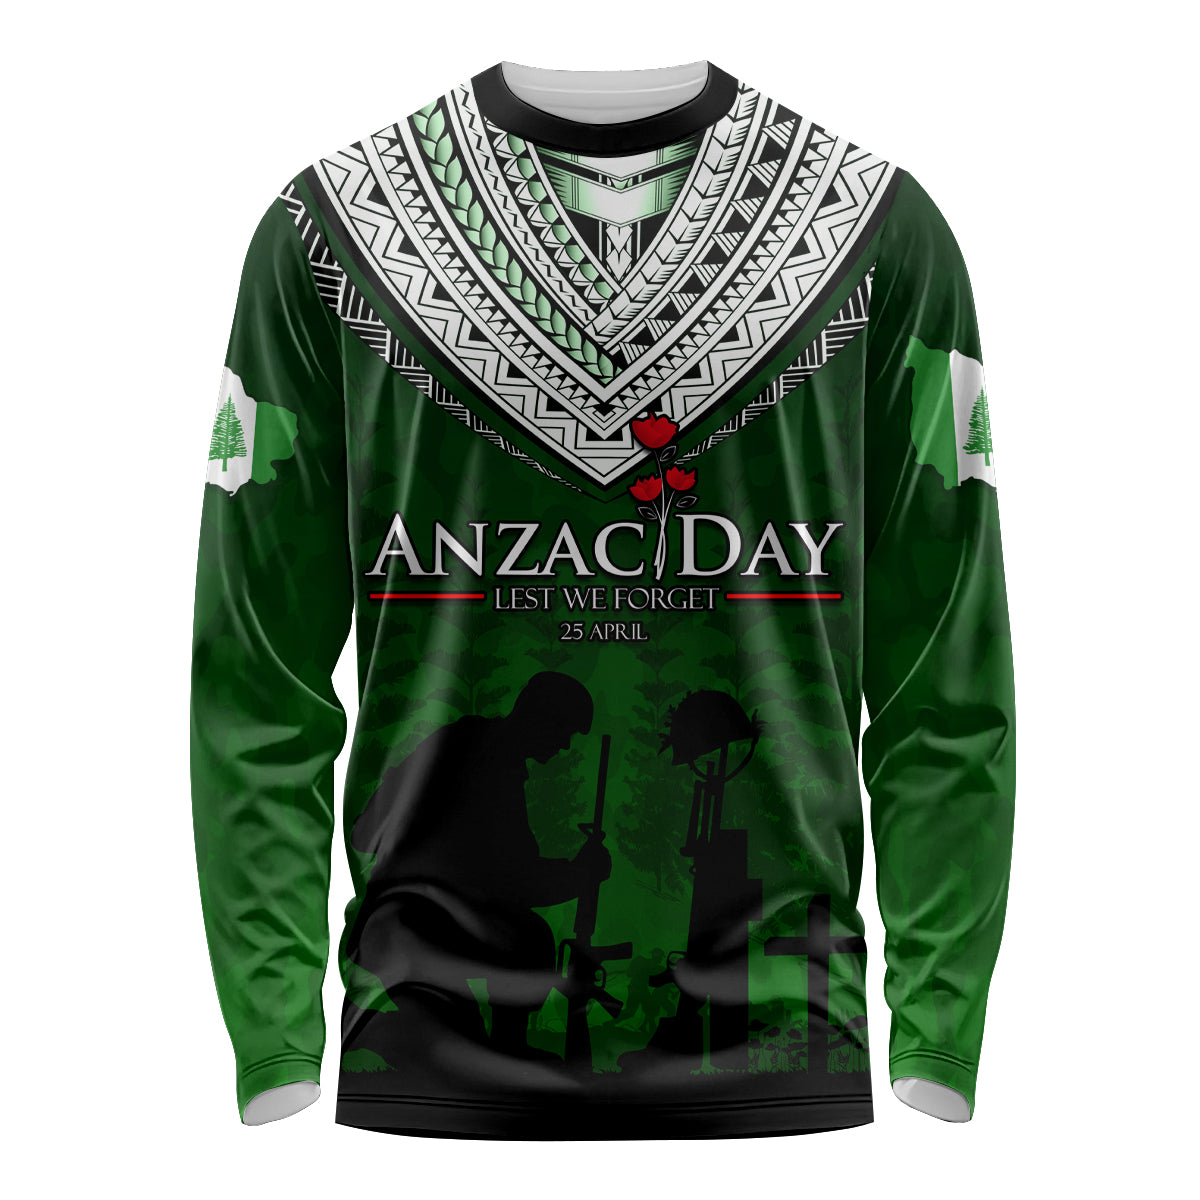 Norfolk Island ANZAC Day Long Sleeve Shirt Soldier Lest We Forget Camouflage LT03 Unisex Green - Polynesian Pride